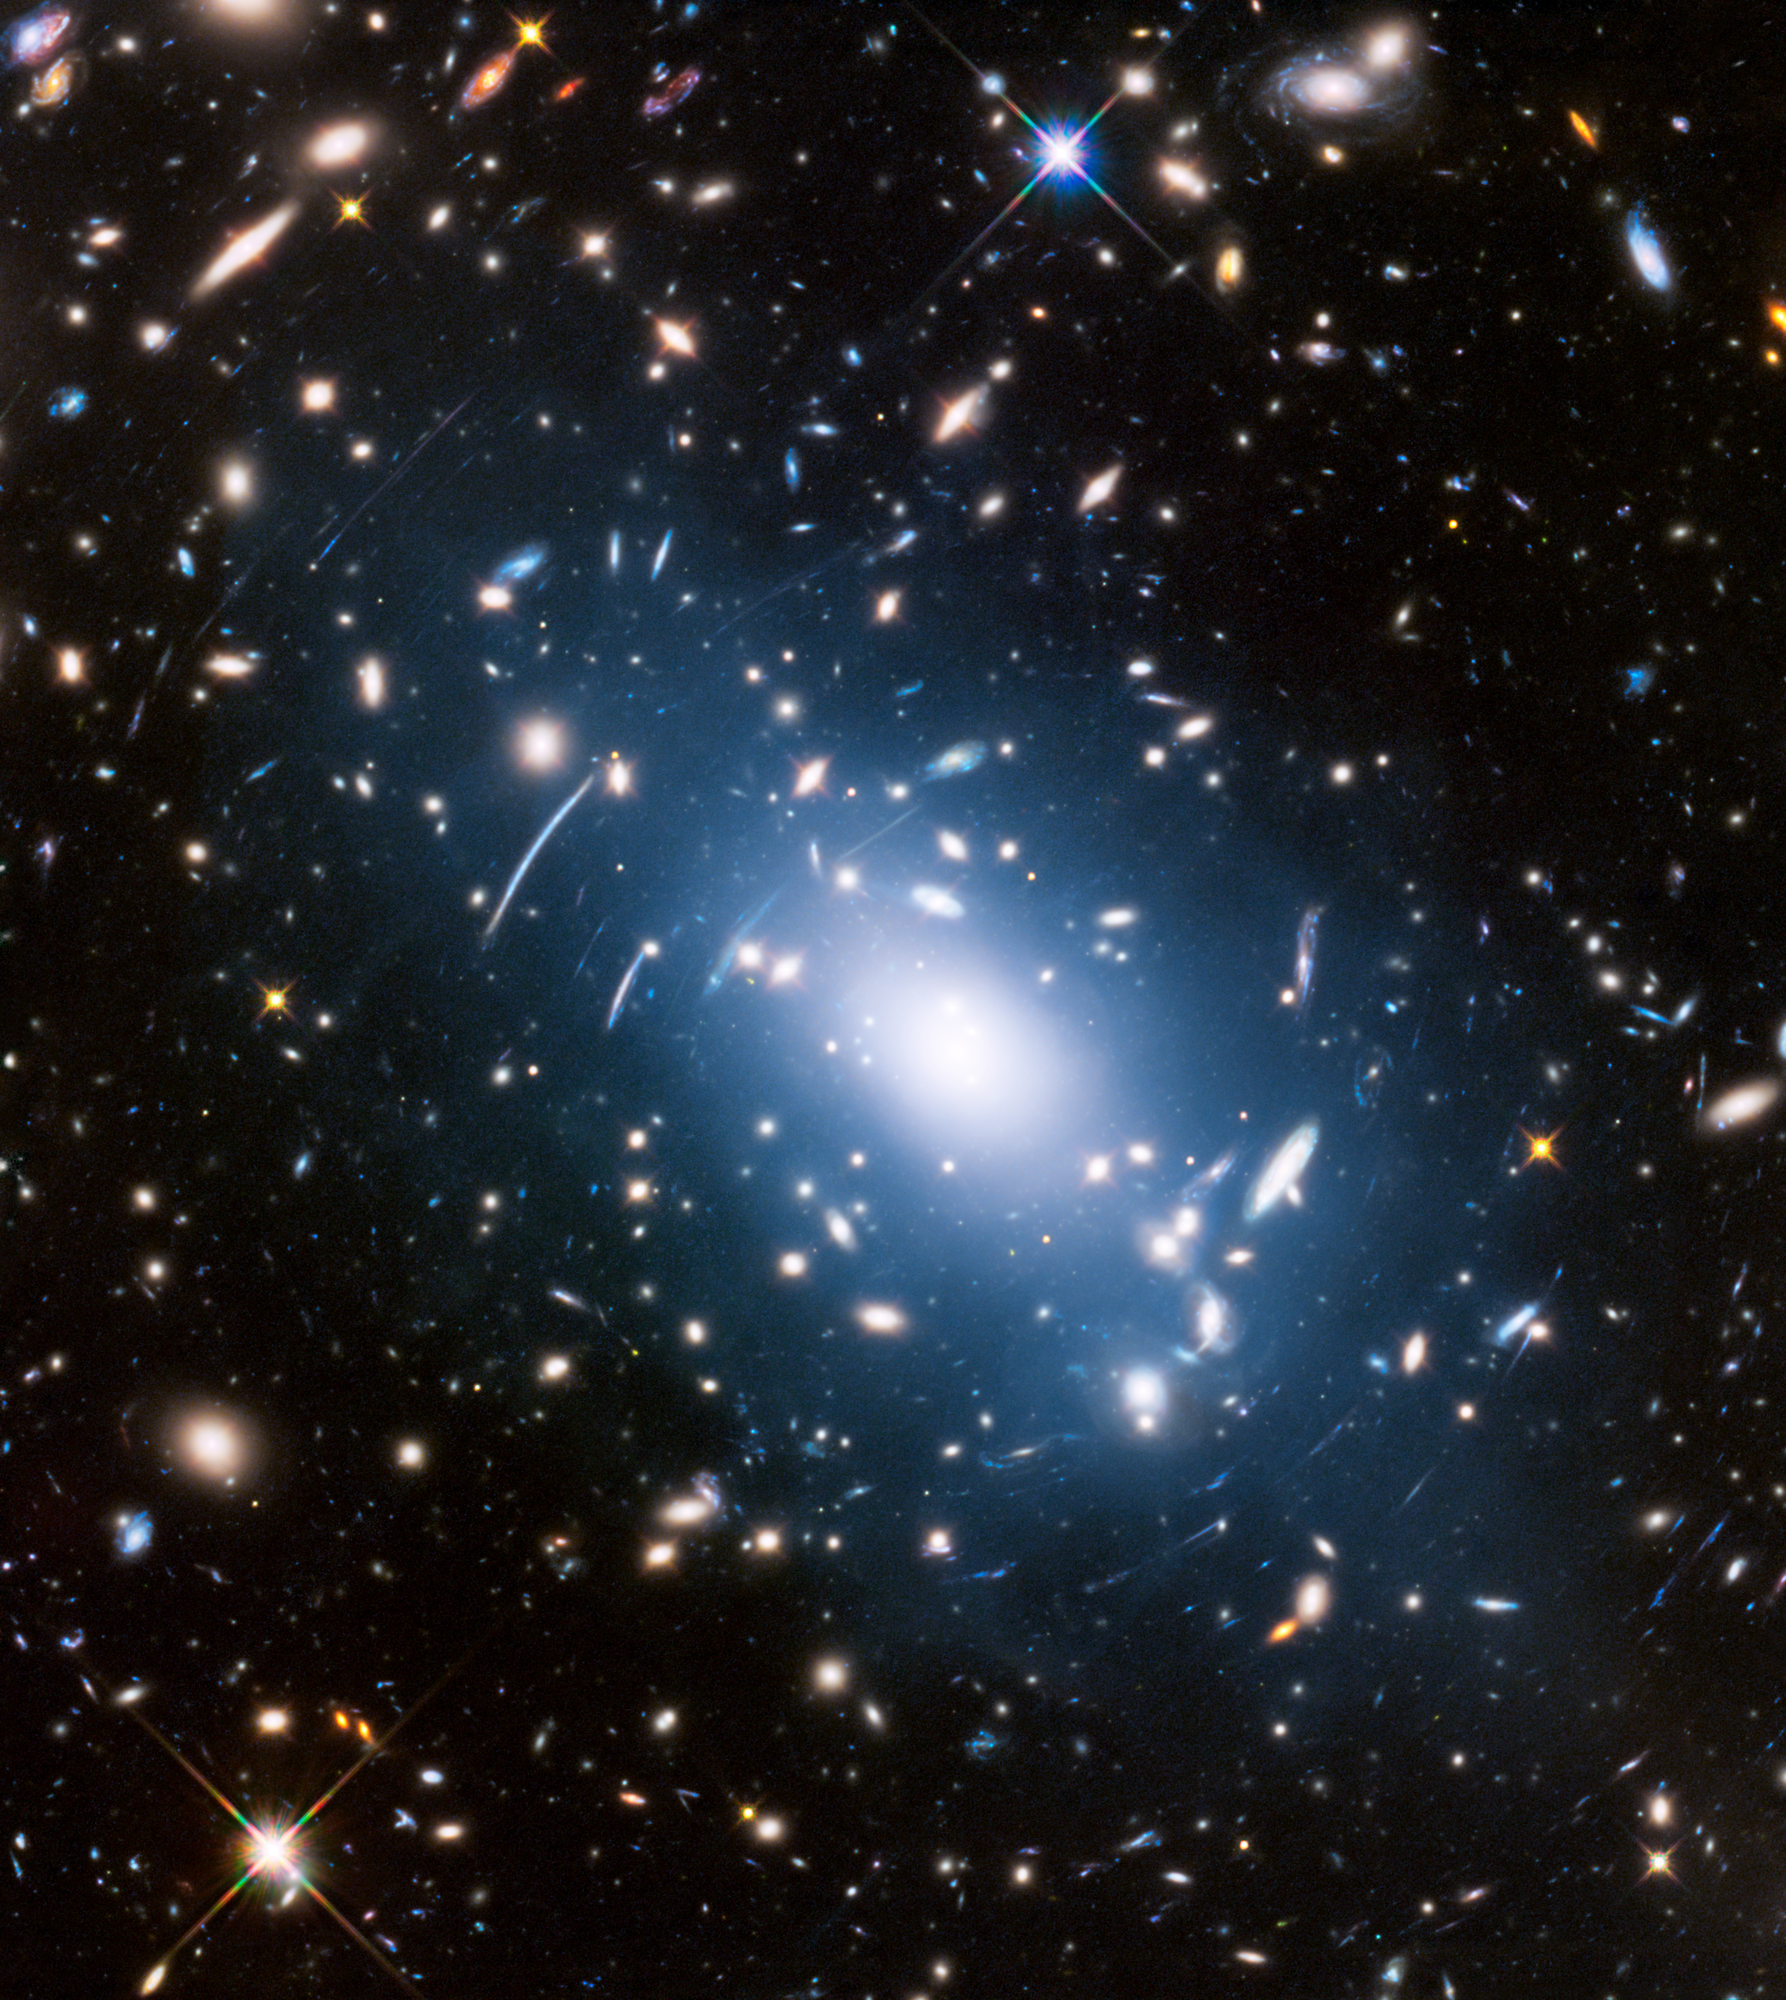 Massive galaxy cluster Abell S1063 is shown at the center of this Hubble image, surrounded by more distant galaxies that are magnified and warped by the cluster’s immense gravity.  A faint haze of intracluster light is visible between the galaxies, produced by free-floating stars.